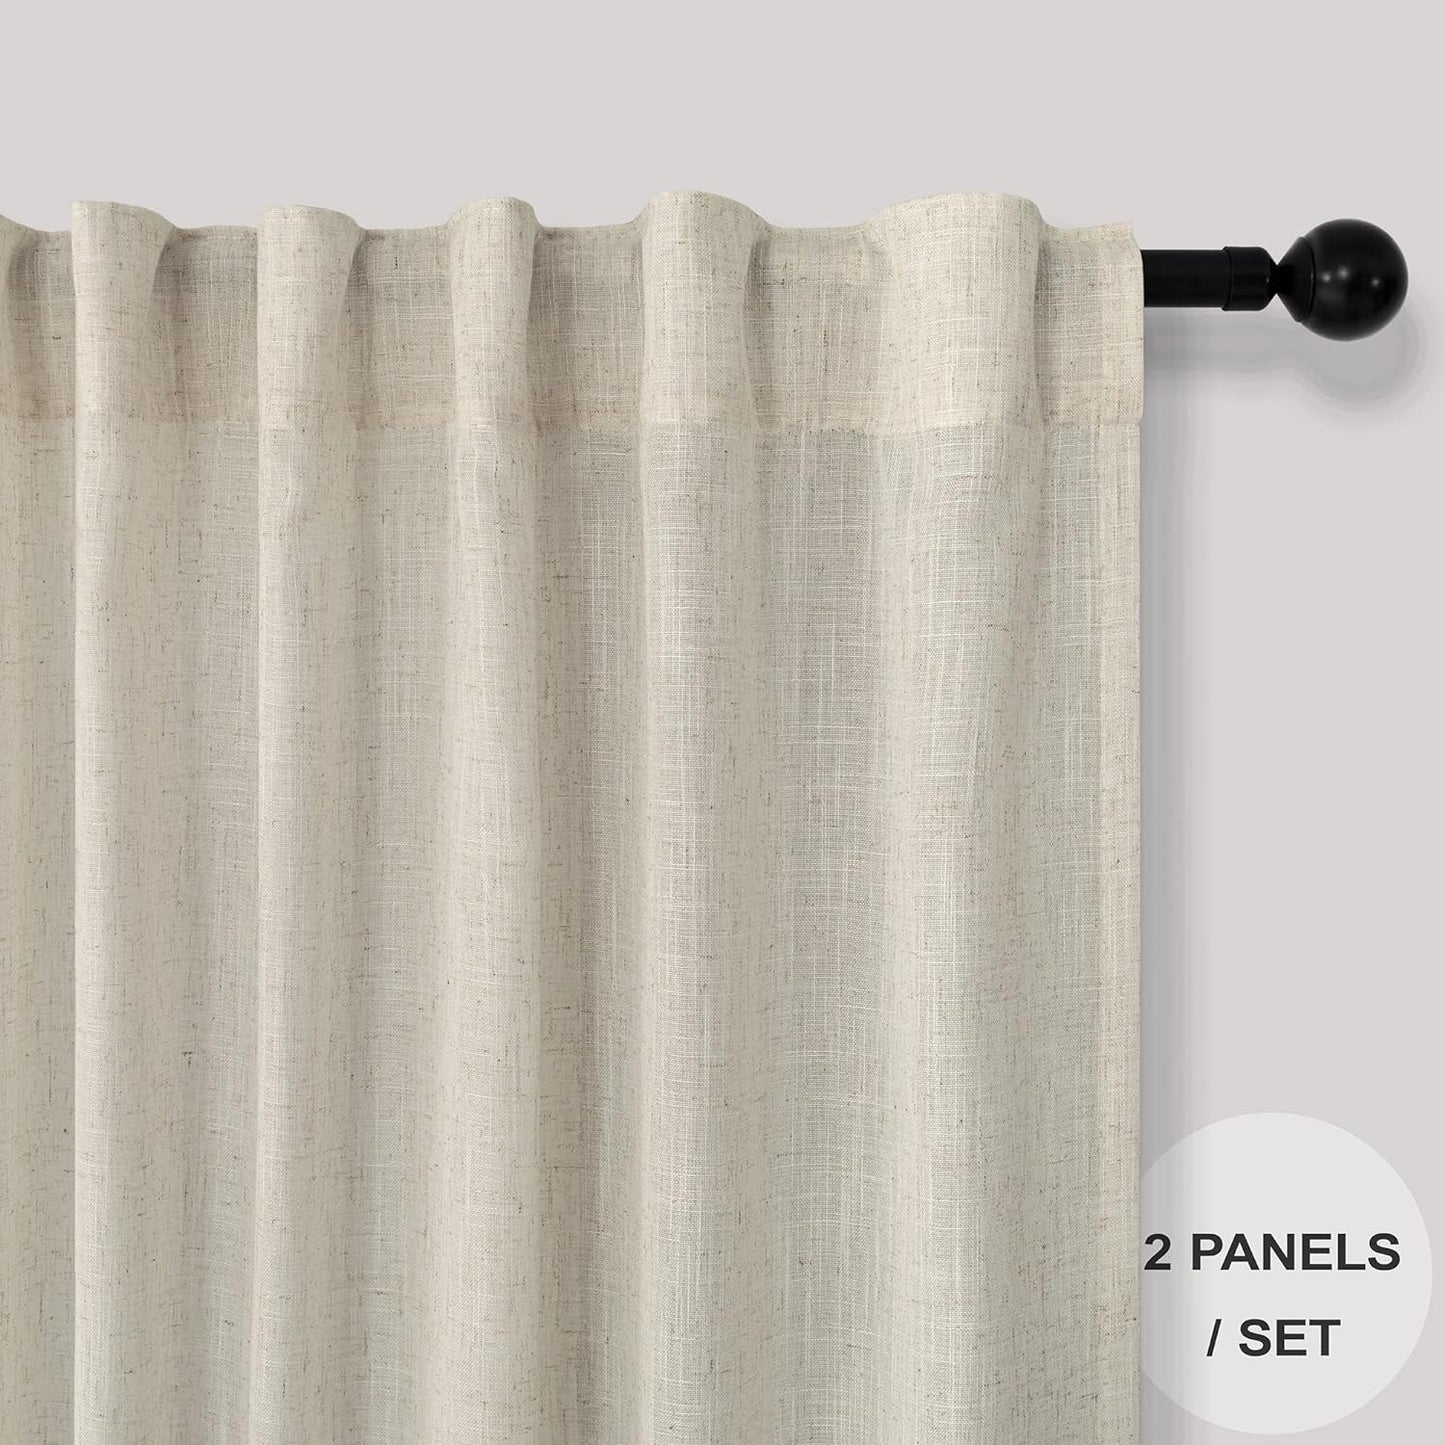 Pitalk Linen Curtains 102 Inches Long for Living Room 2 Panels